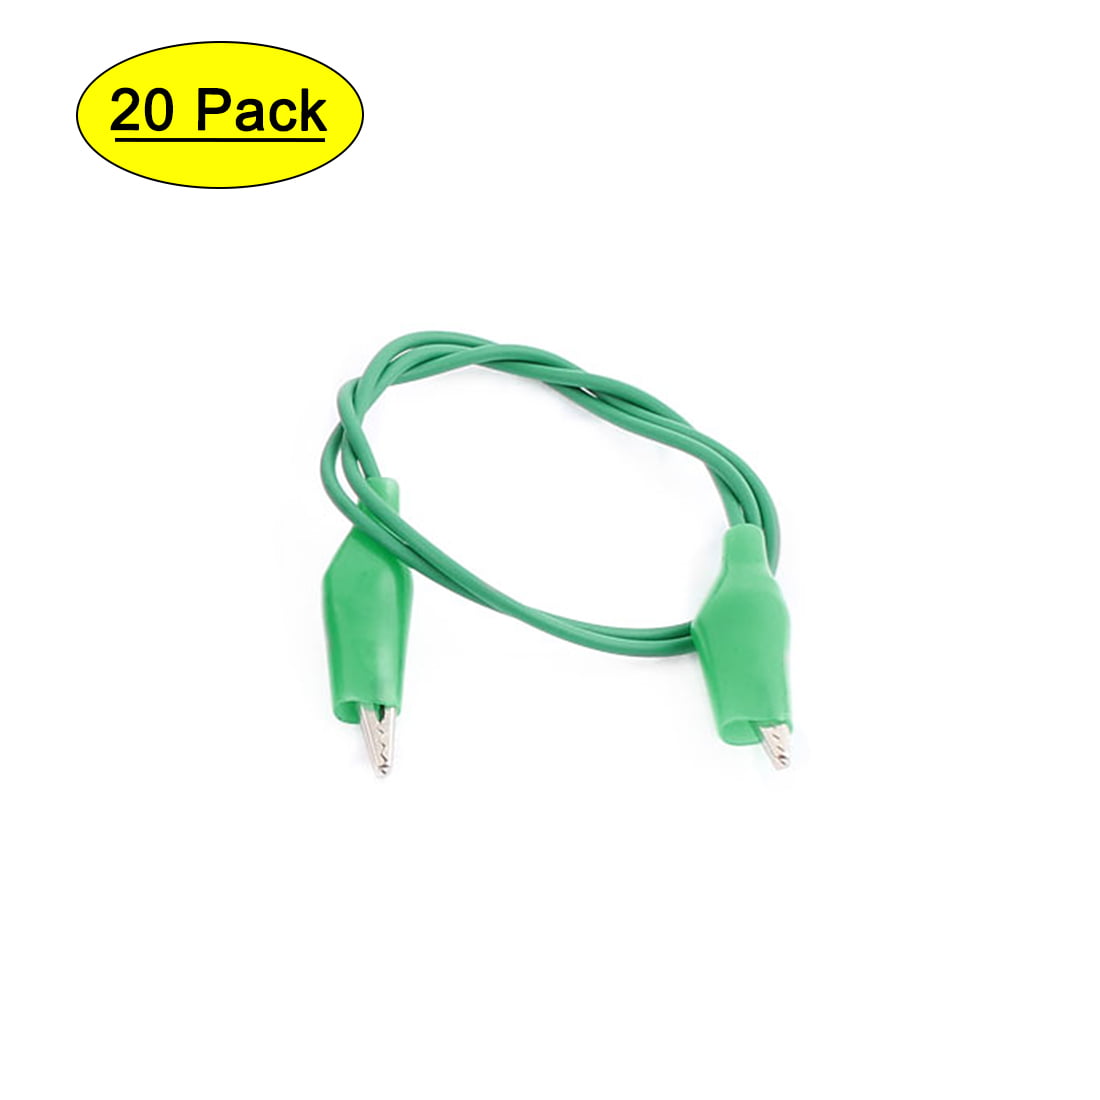 20 PCS Crocodile Clip Cable Alligator Jumper Electrical Lead Wire Double-ended 